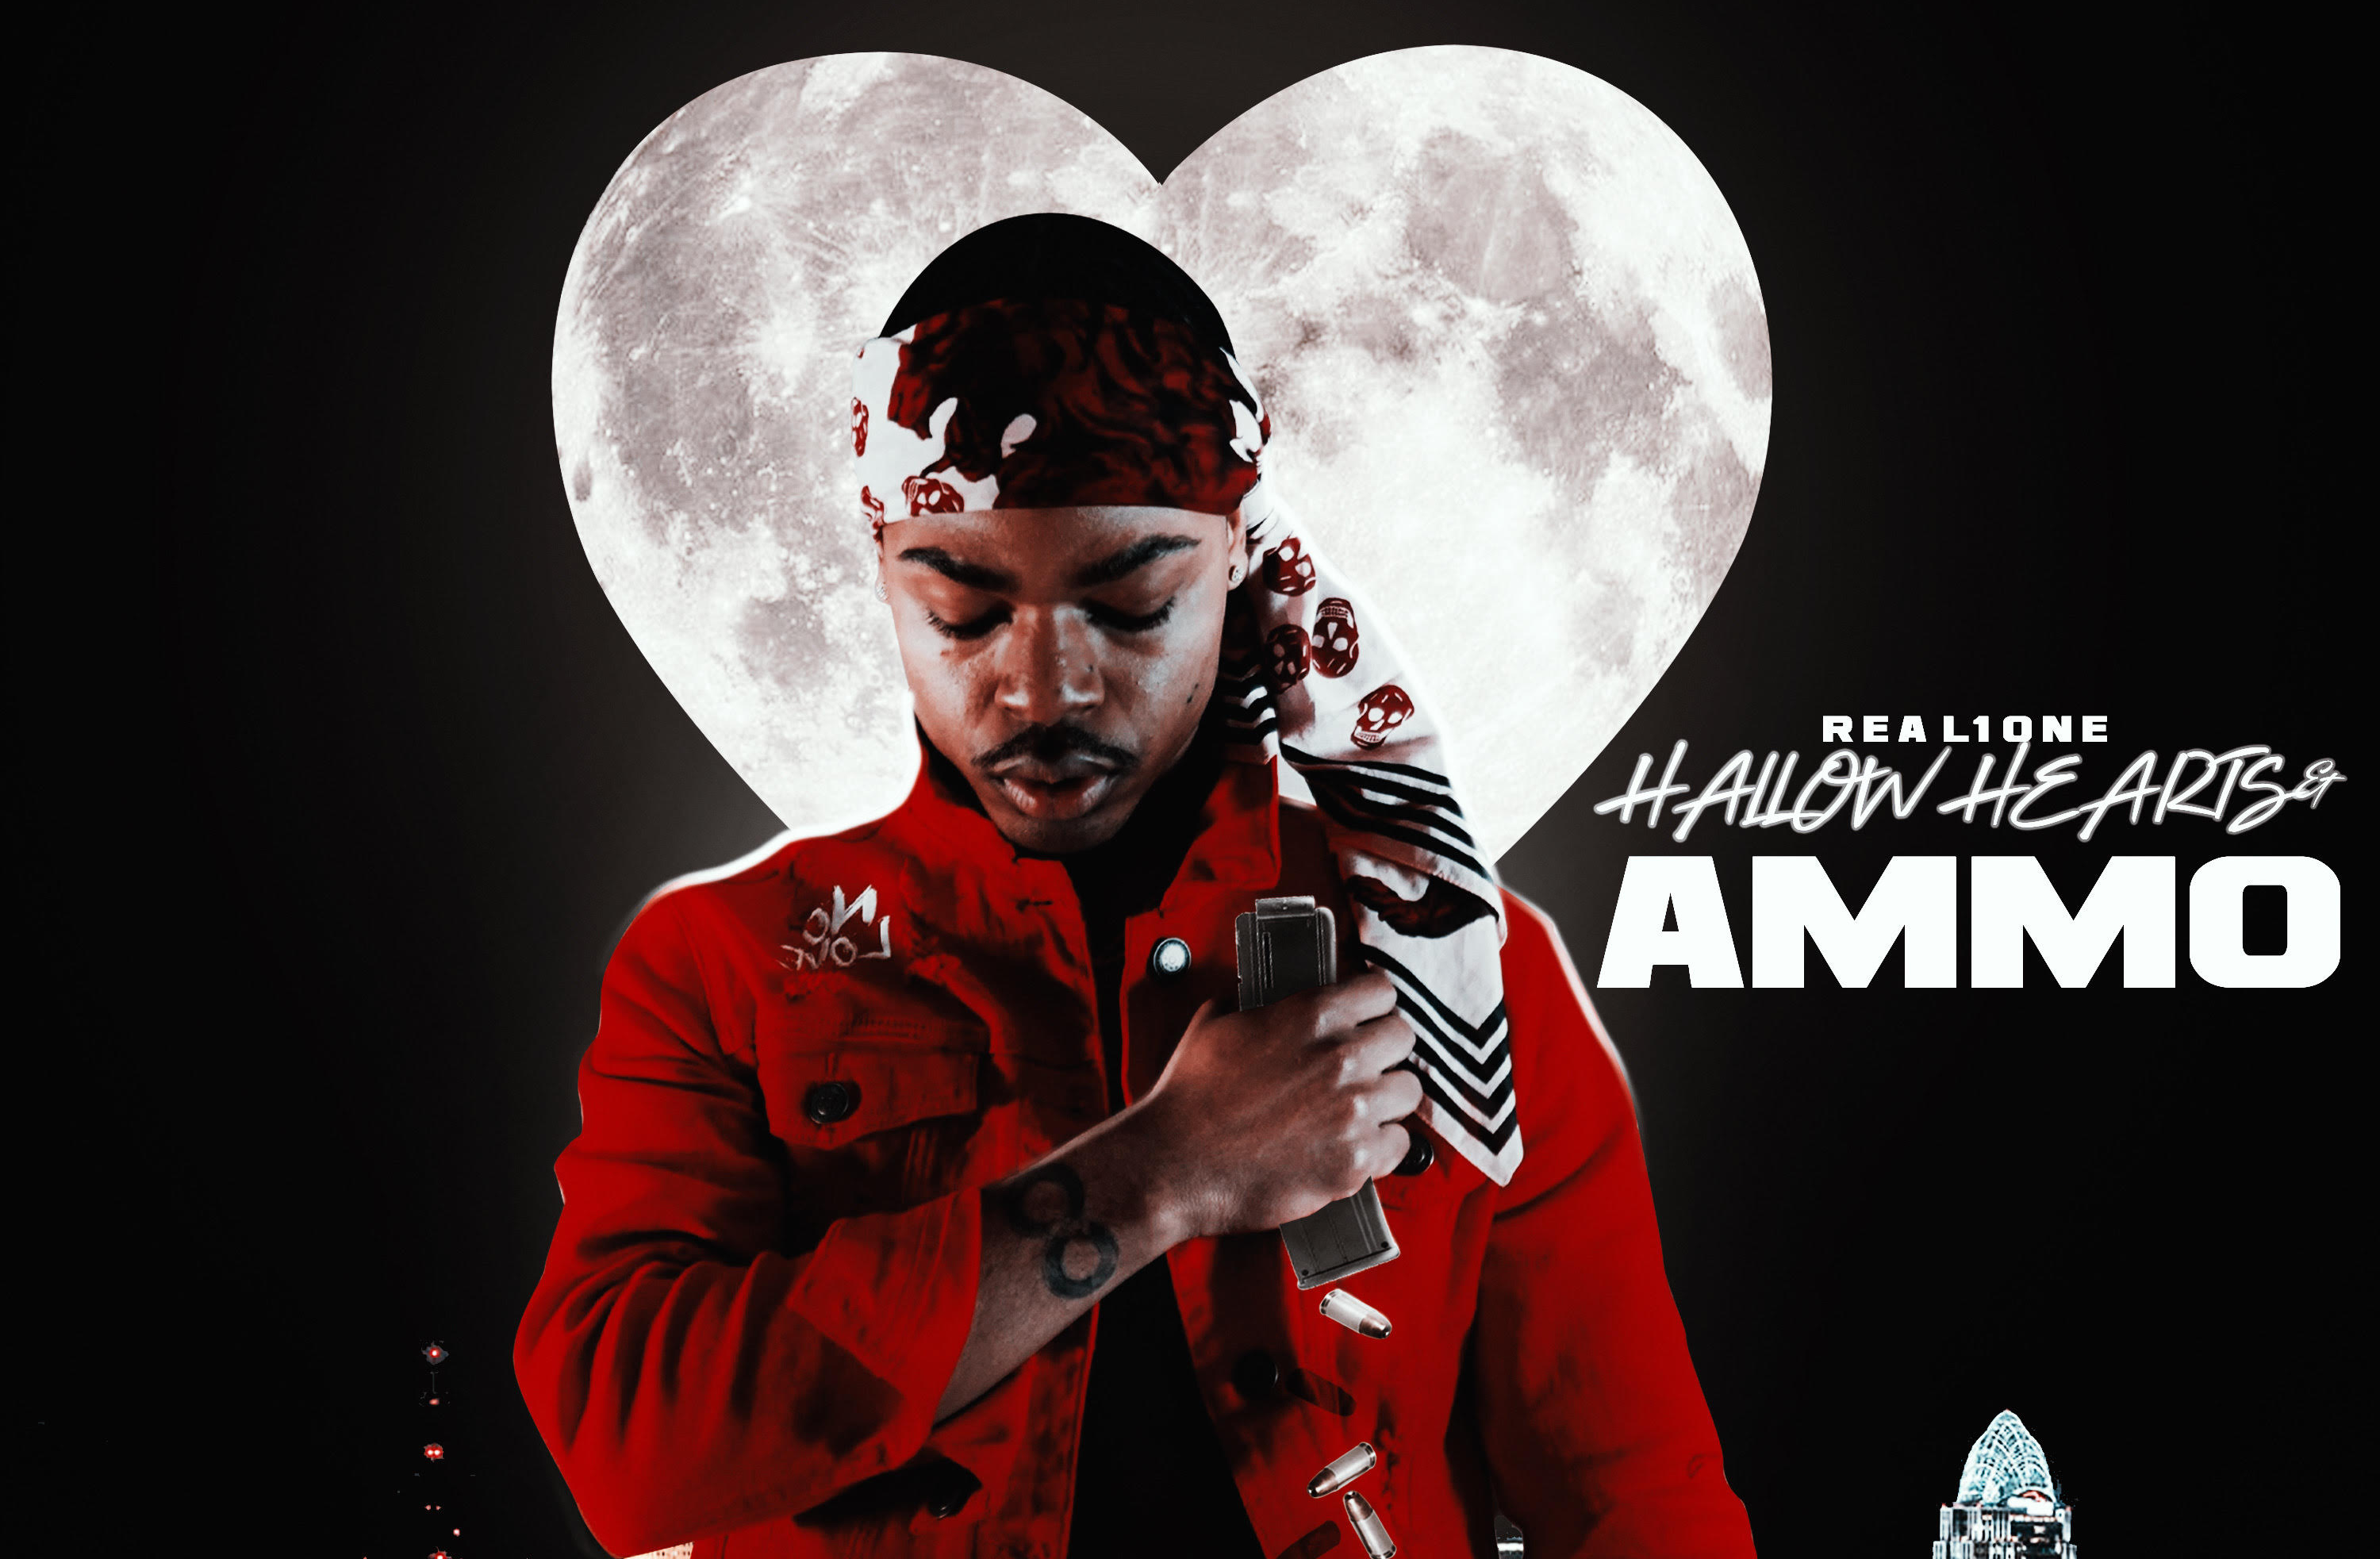 REAL1ONE Is a Musical Storyteller in His New Album 'Hollow Hearts & Ammo'